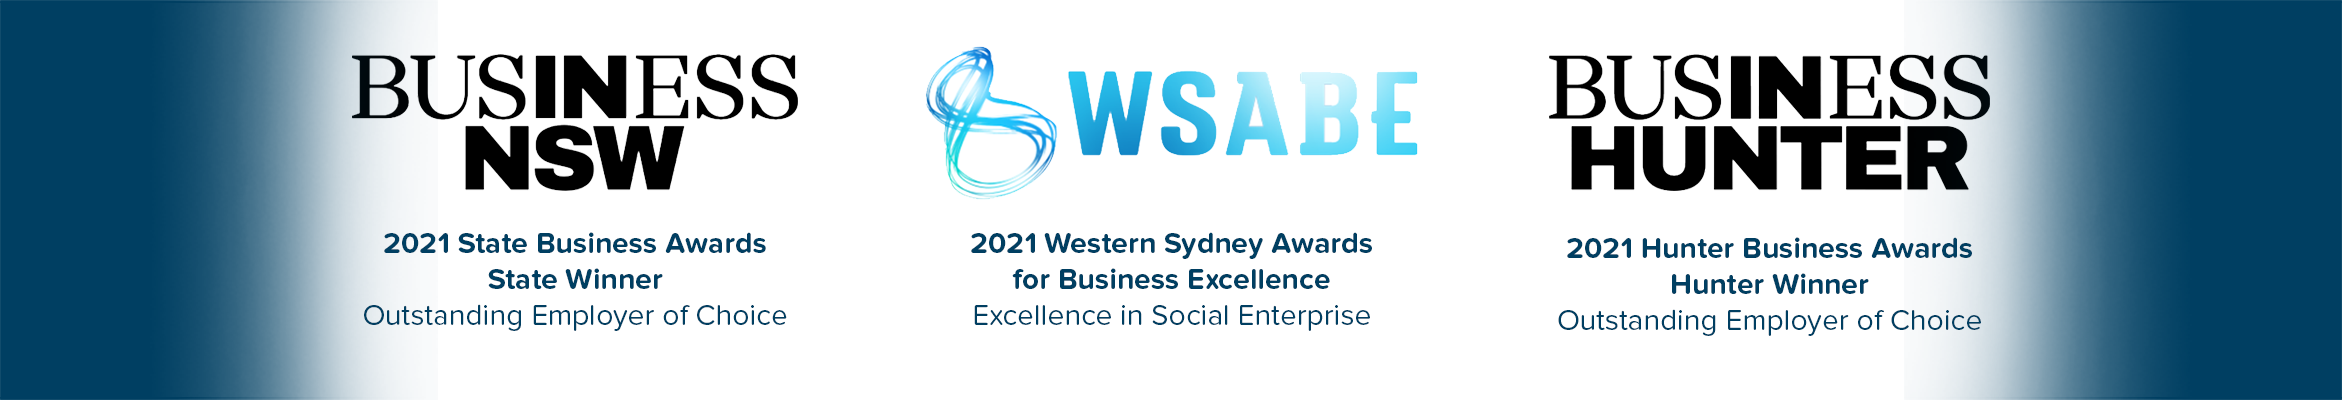 A list of three awards Hume has won: the 2021 State Business Awards, the 2021 Western Sydney Awards for Business Excellence, and the 2021 Hunter Business Awards.